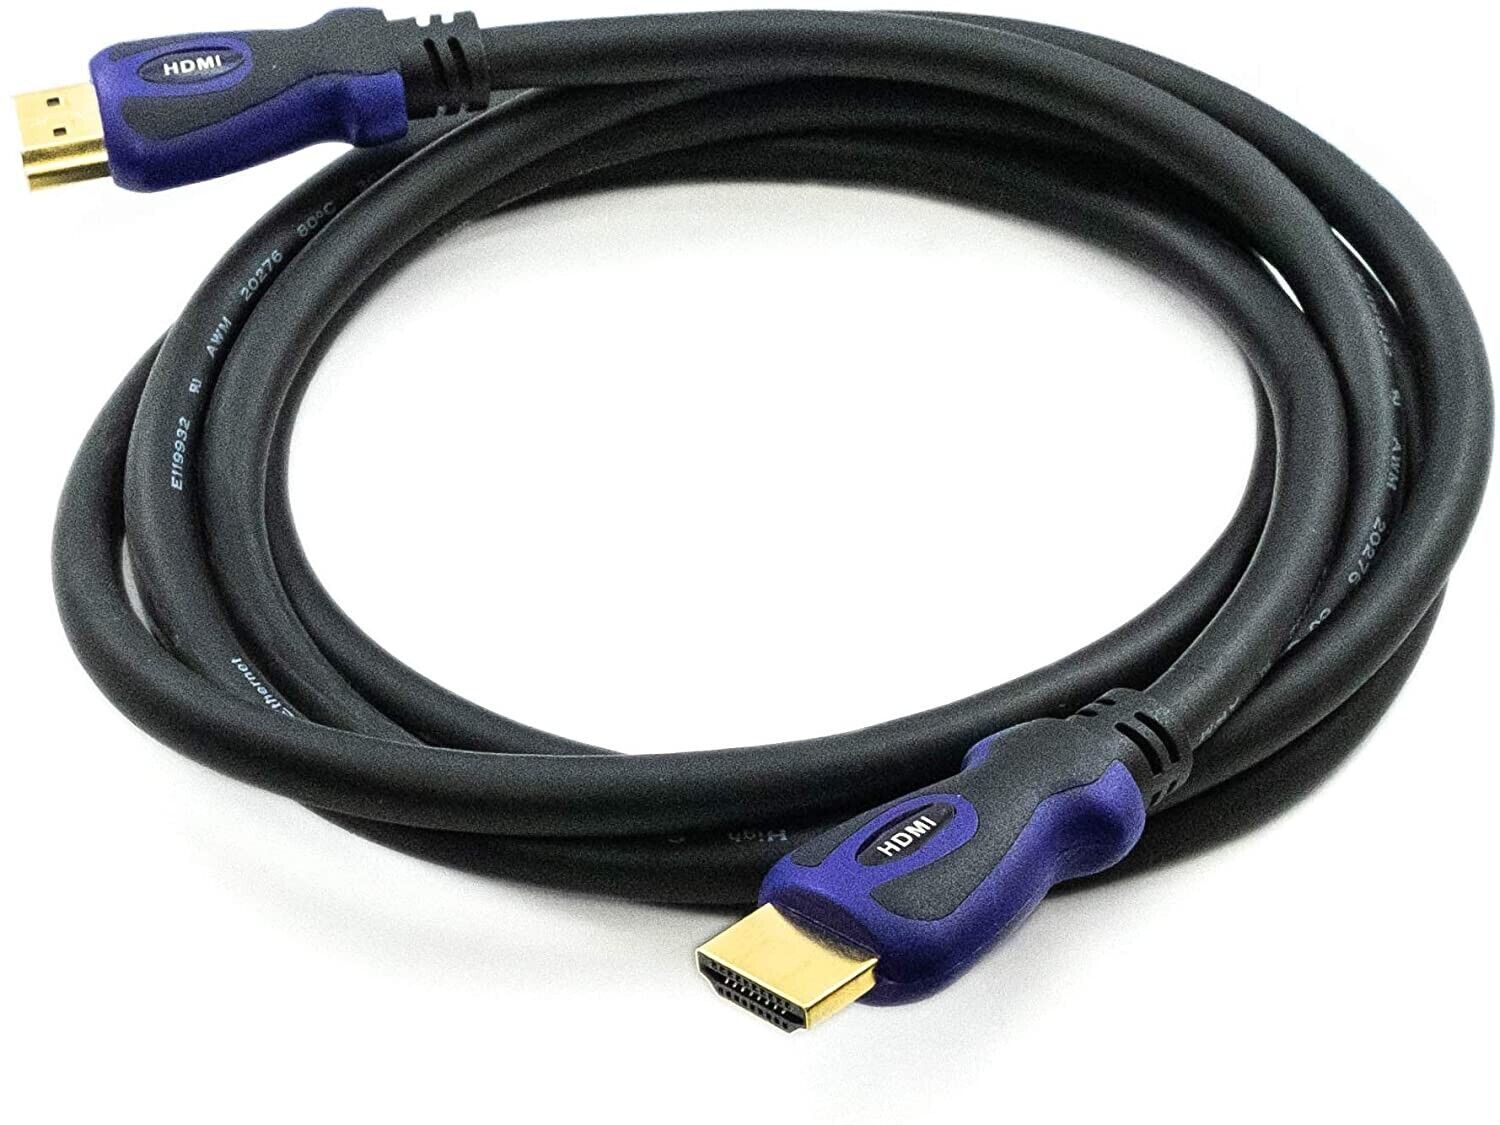 PTC 6FT Premium GOLD Series HDMI Cable with Ethernet (6 feet) HH4-06G